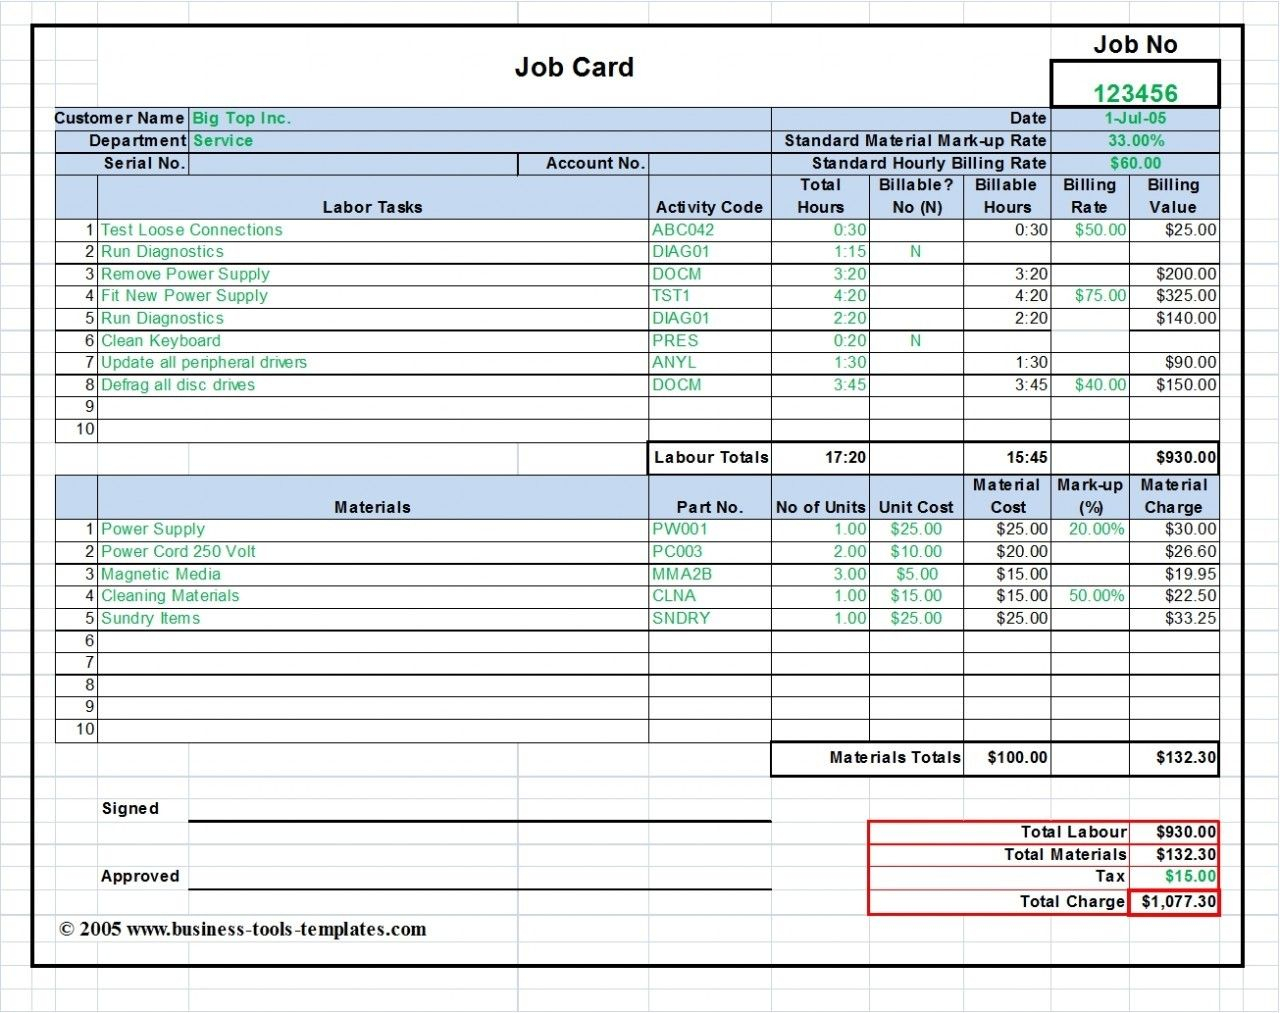 Workshop Job Card Template Excel, Labor & Material Cost Within Rate Card Template Word